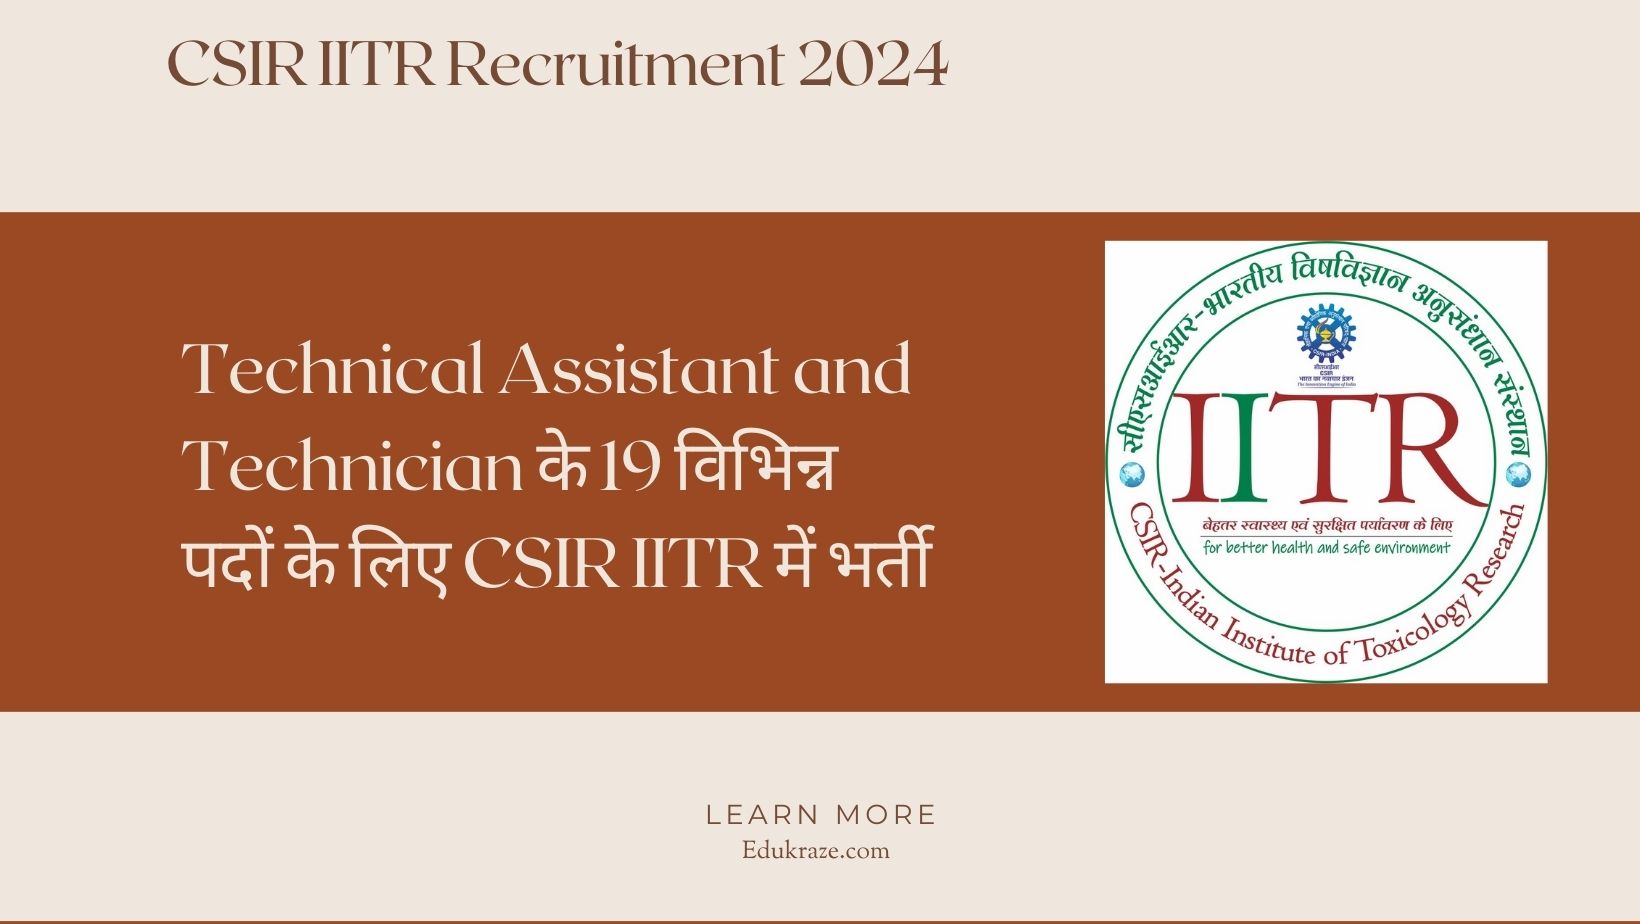 Technical Assistant and Technician Recruitment Out at CSIR IITR